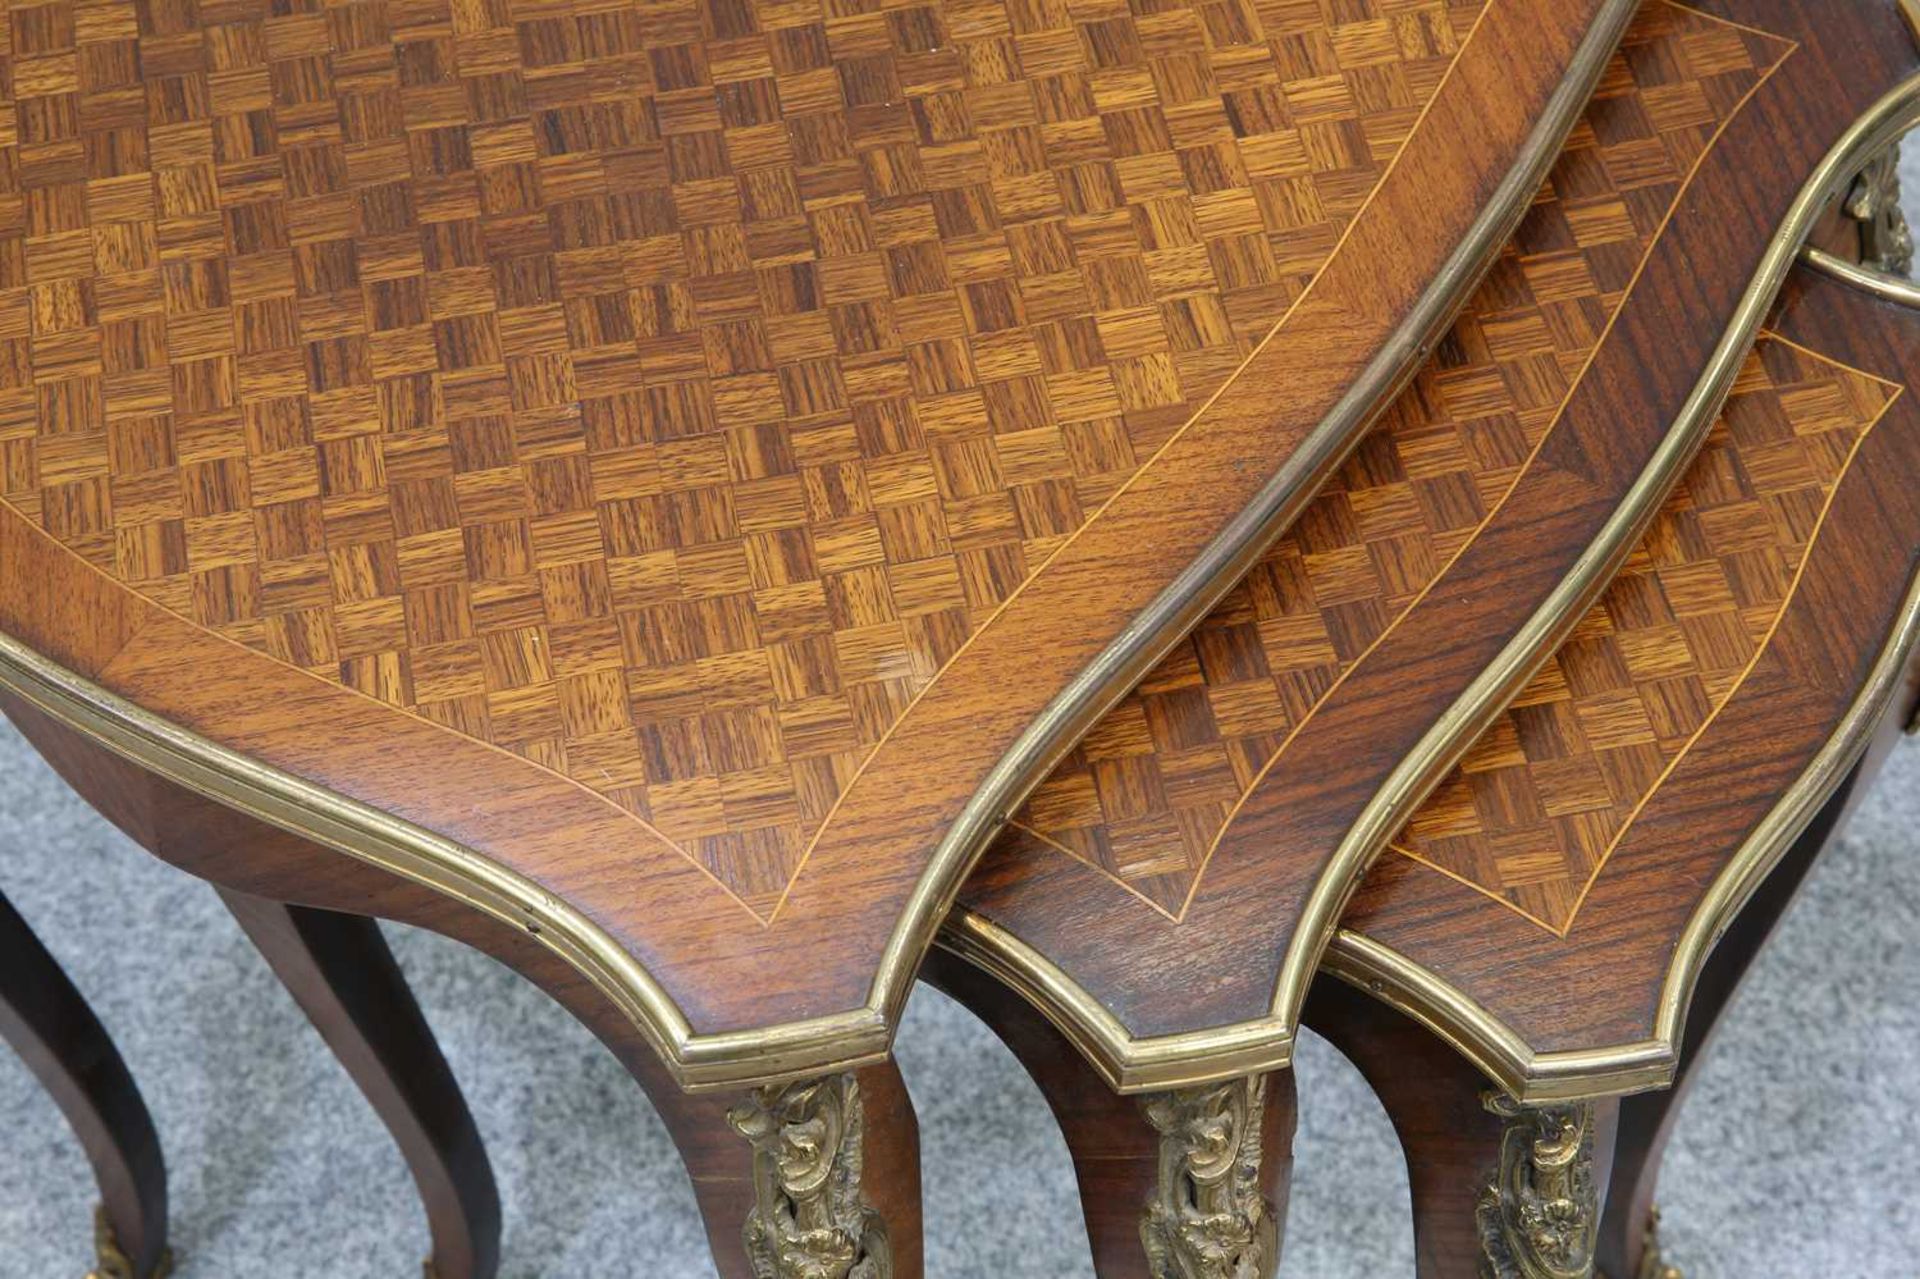 A SET OF THREE LOUIS XV STYLE GILT-METAL MOUNTED PARQUETRY NESTING TABLES, MID-20TH CENTURY - Image 2 of 2